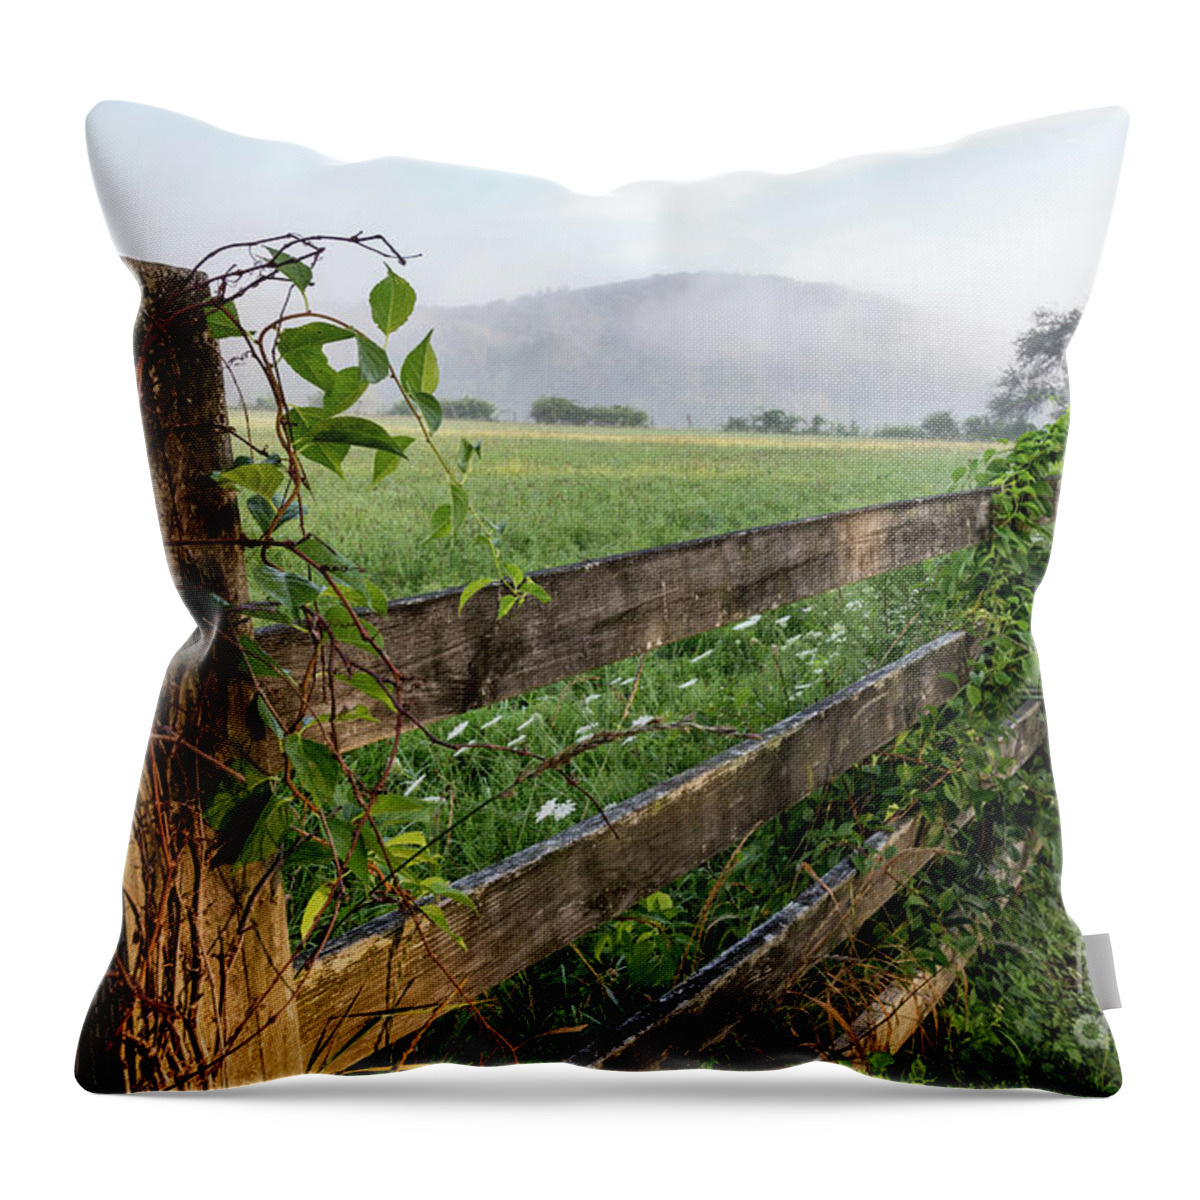 Fog Throw Pillow featuring the photograph North Road View by Jim Gillen